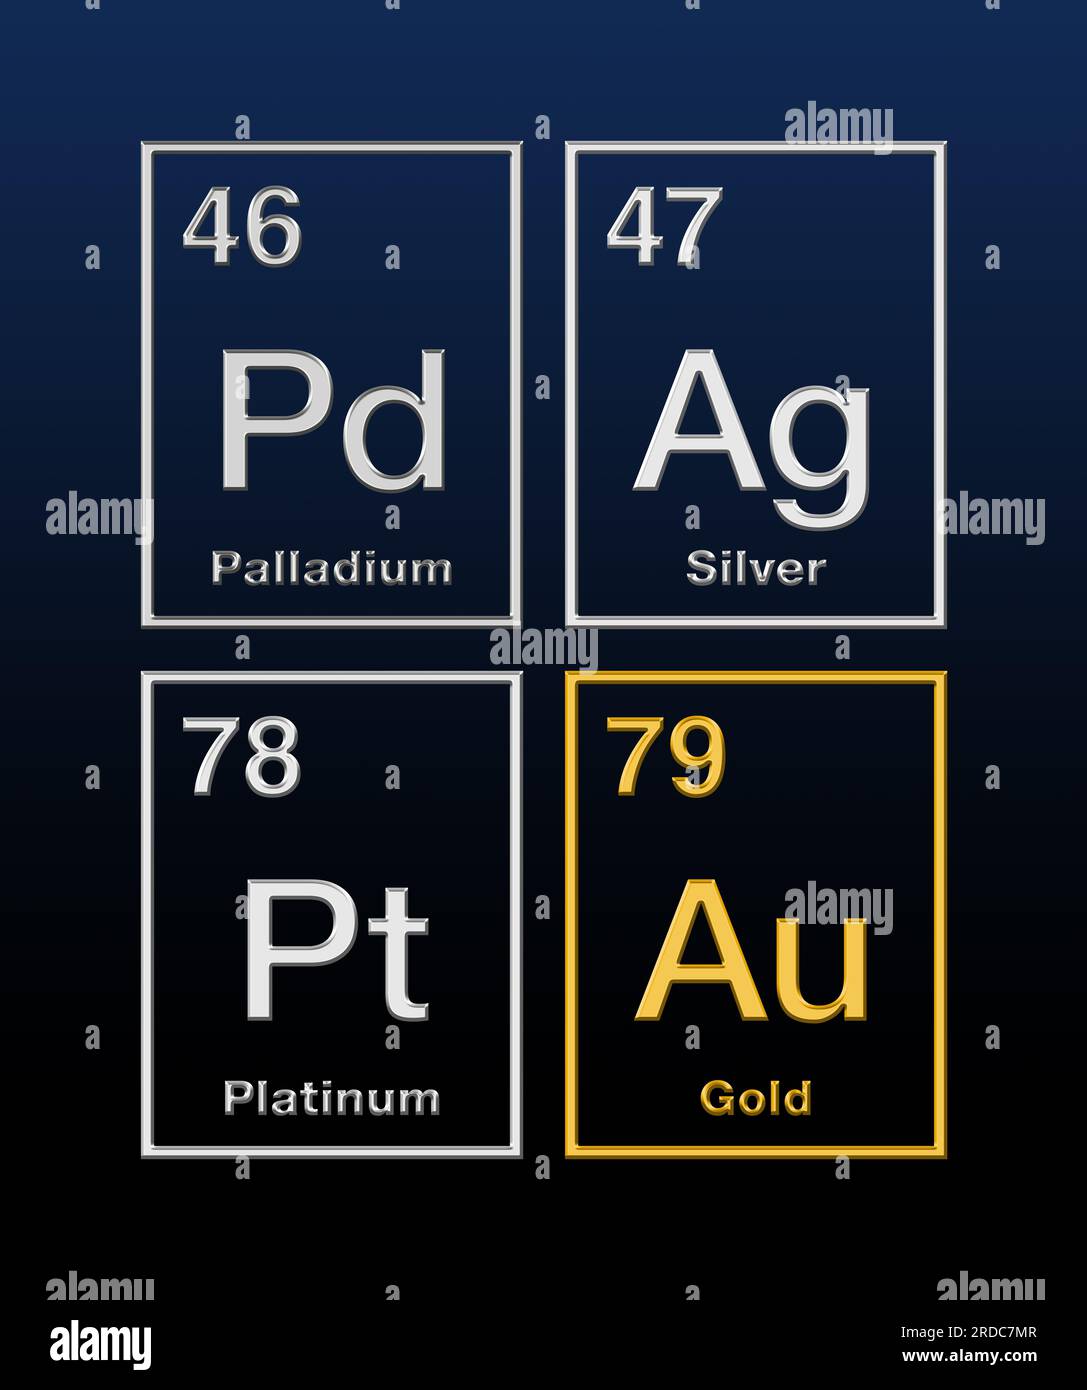 Precious metals gold, silver, platinum and palladium, from the periodic table, with atomic numbers and relief shaped. Chemical elements. Stock Photo